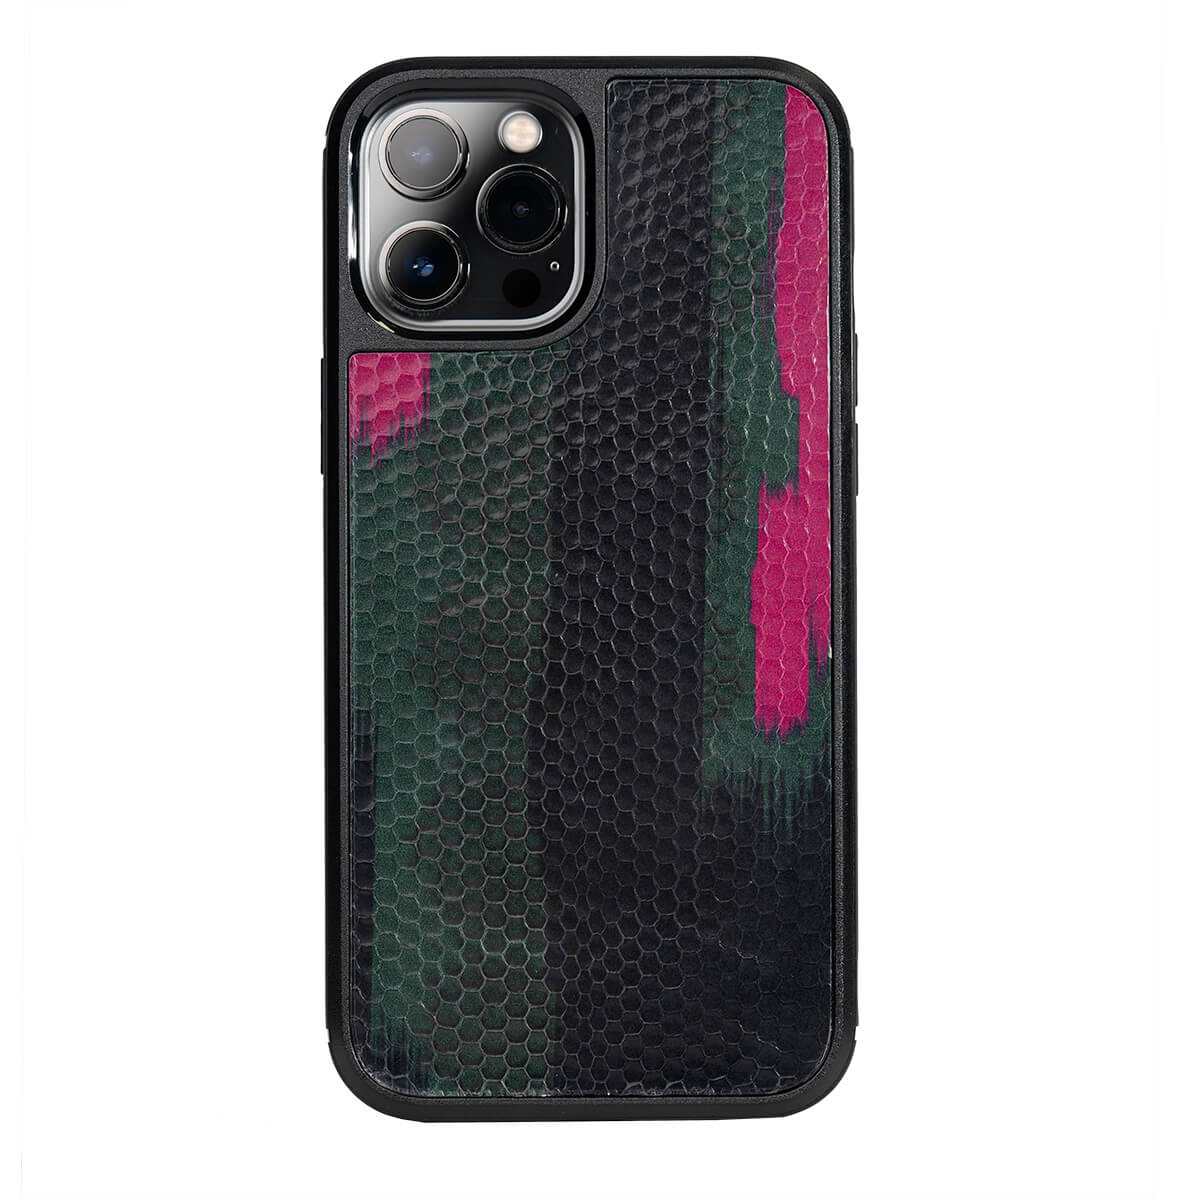 IPHONE 12 PRO MAX CASES COBRA BLACK AND GREEN